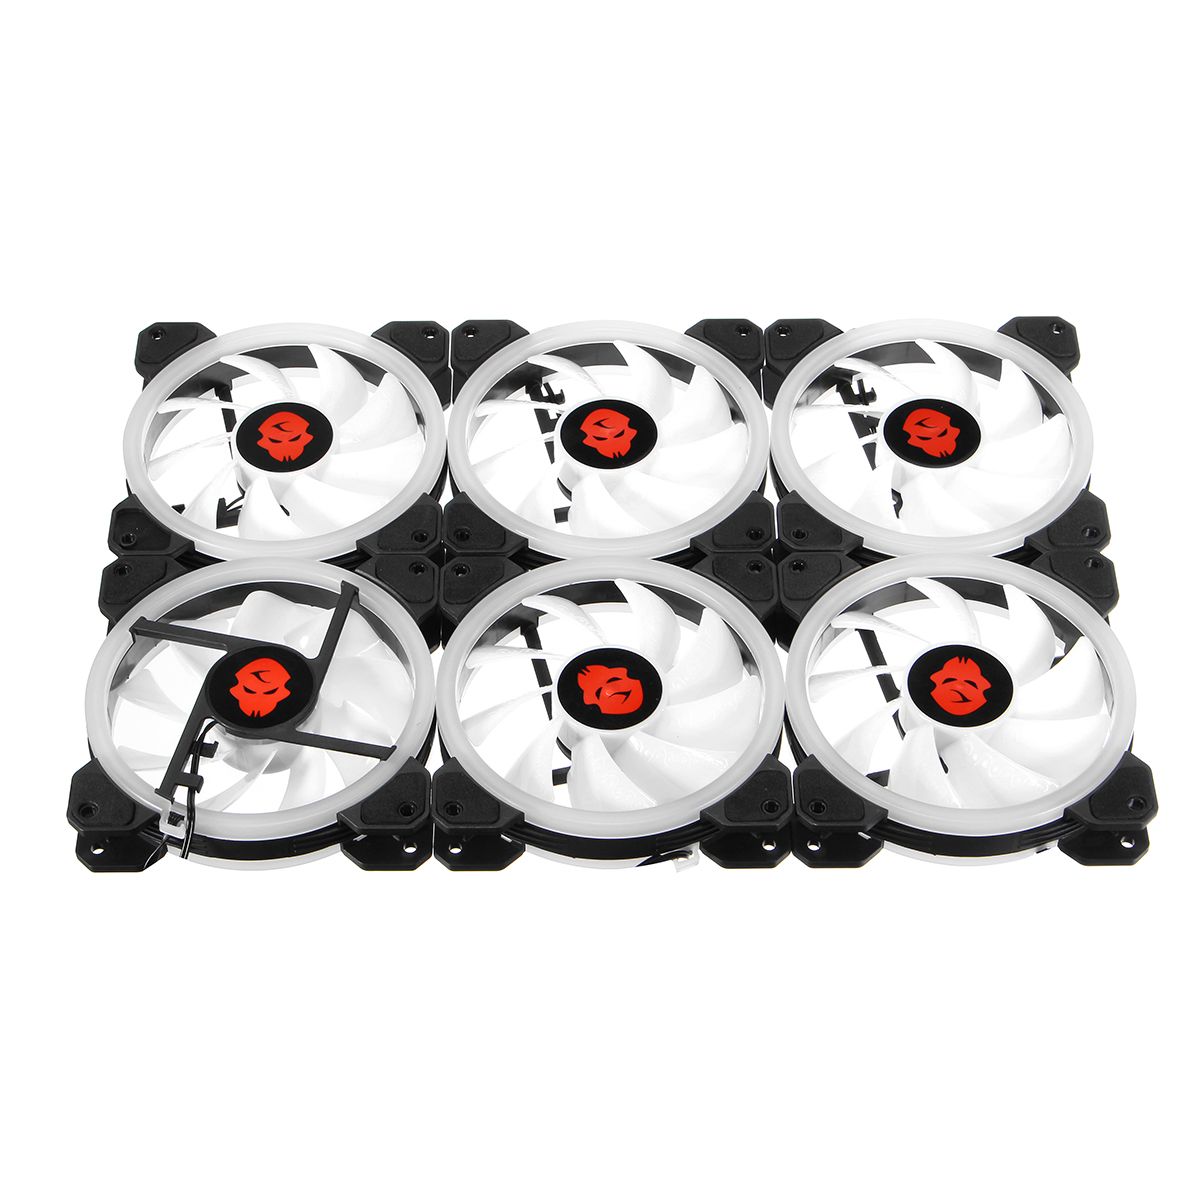 Coolmoon-6PCS-120mm-Adjustable-RGB-LED-Light-Computer-PC-Case-Cooling-Fan-with-Remote-1558132